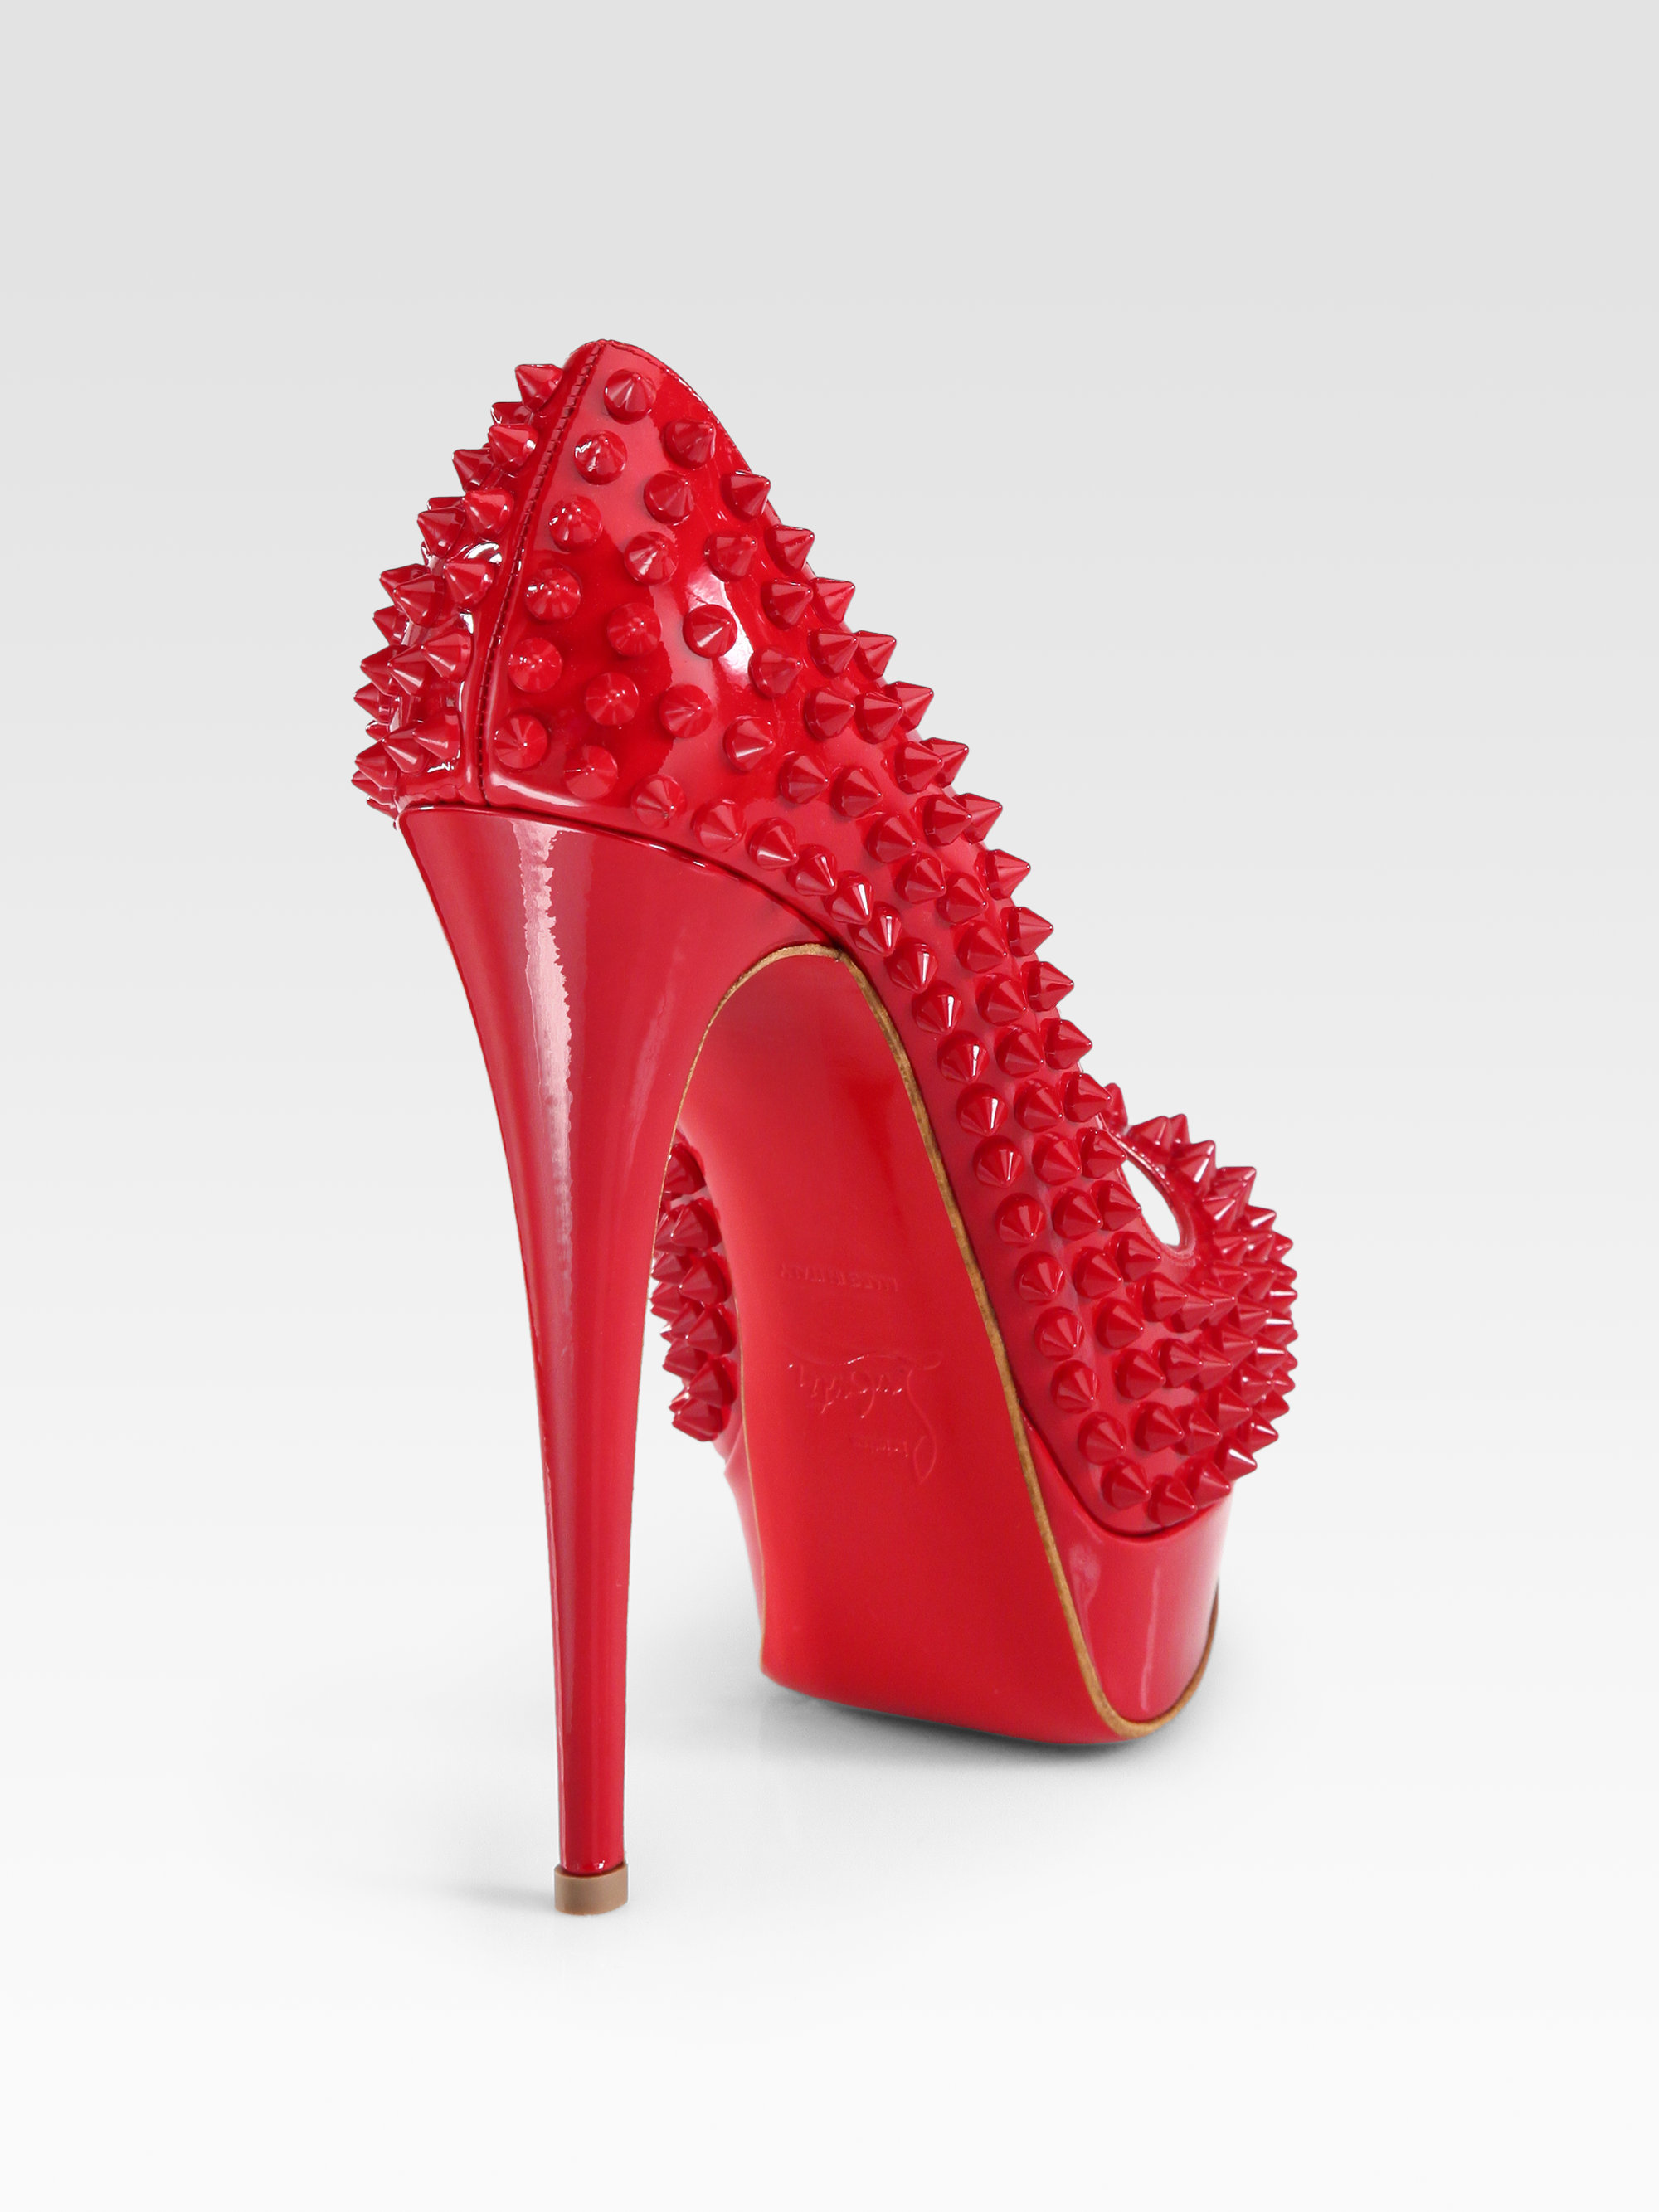 Christian louboutin Studded Patent Leather Platform Pumps in Red | Lyst